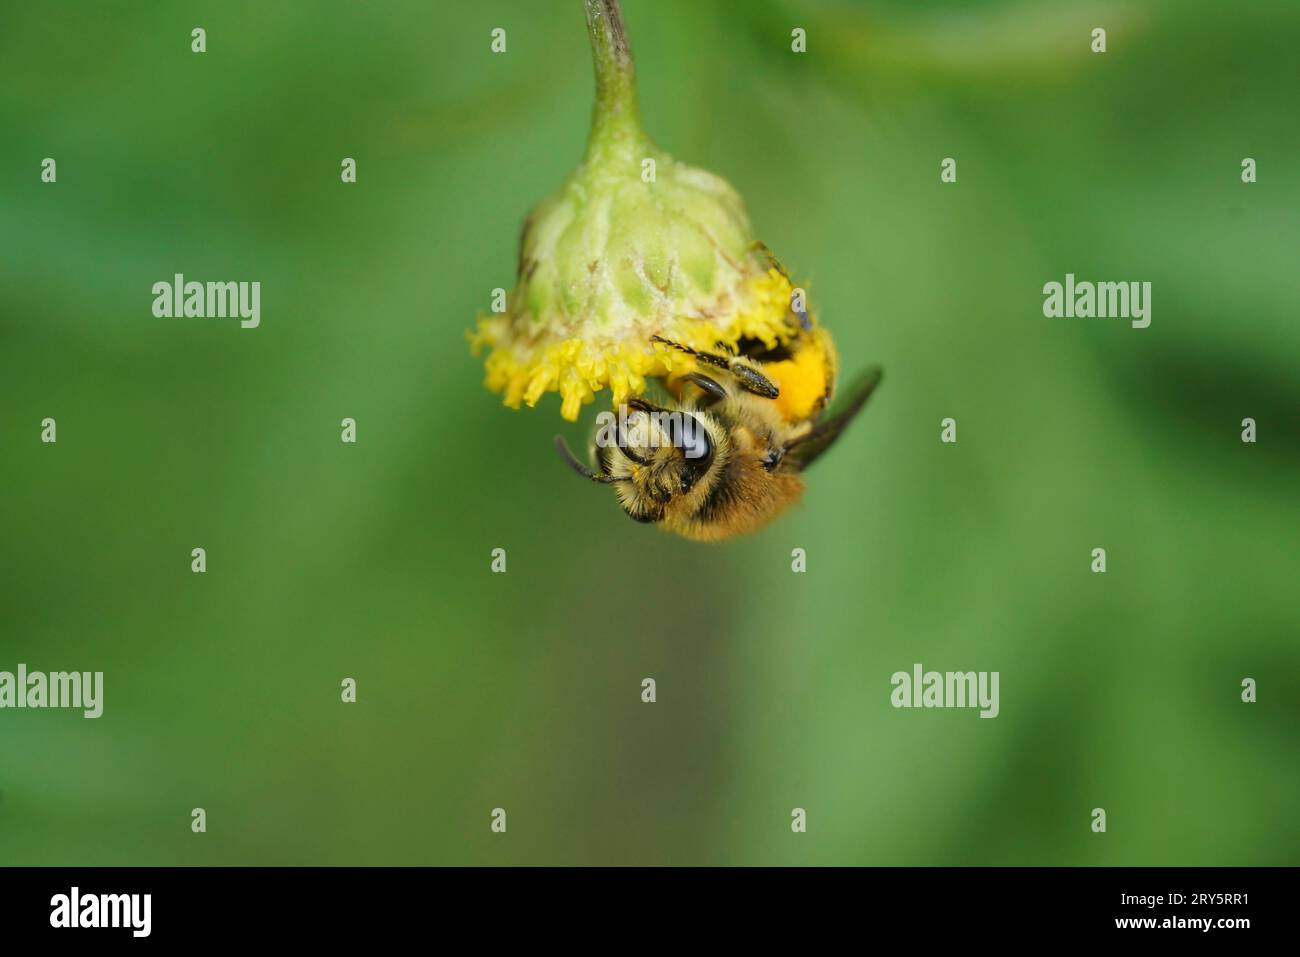 Natural closeup on a Davies' Colletes daviesanus female, hanging downwards on a yellow Tansy flower, Tanacetum vulgare Stock Photo